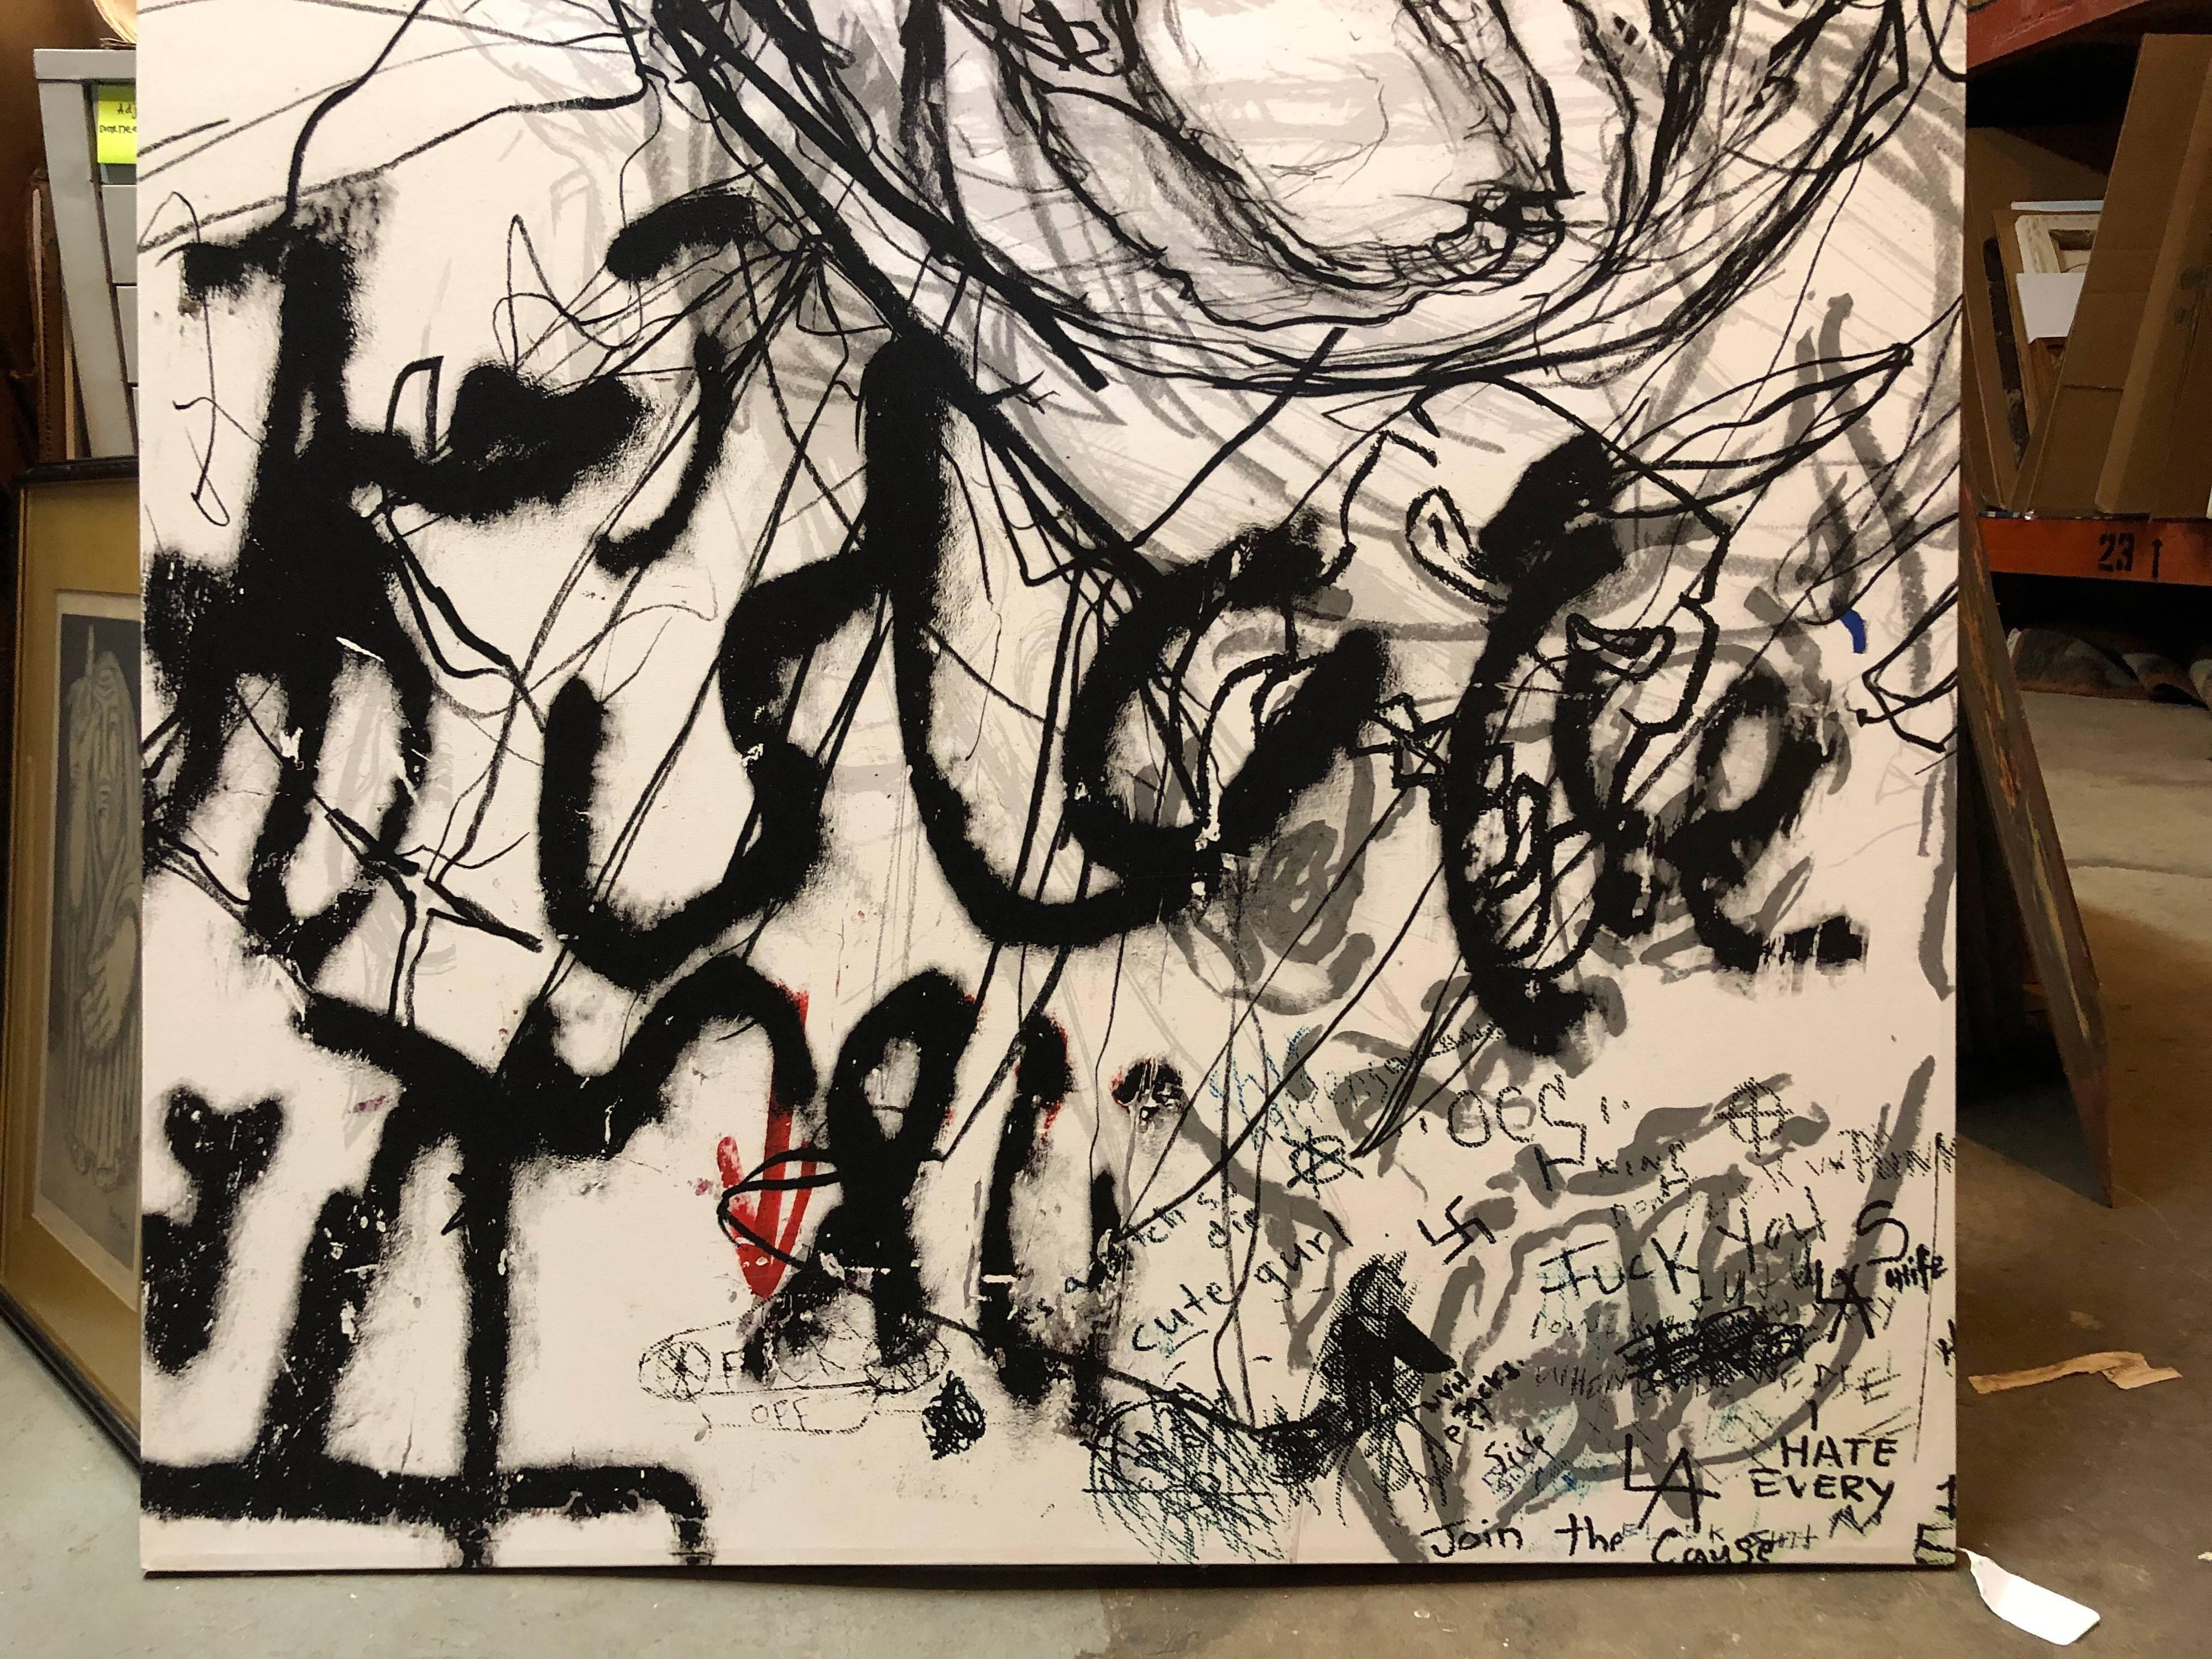 From his show Hashish at Michael Steinberg Gallery (bearing their label verso)
Reviewed by Roberta Smith in the New York Times.
Abstract Expressionism meets graffiti photography. Cy Twombly in cyberspace. Existential physics. The trajectories of car